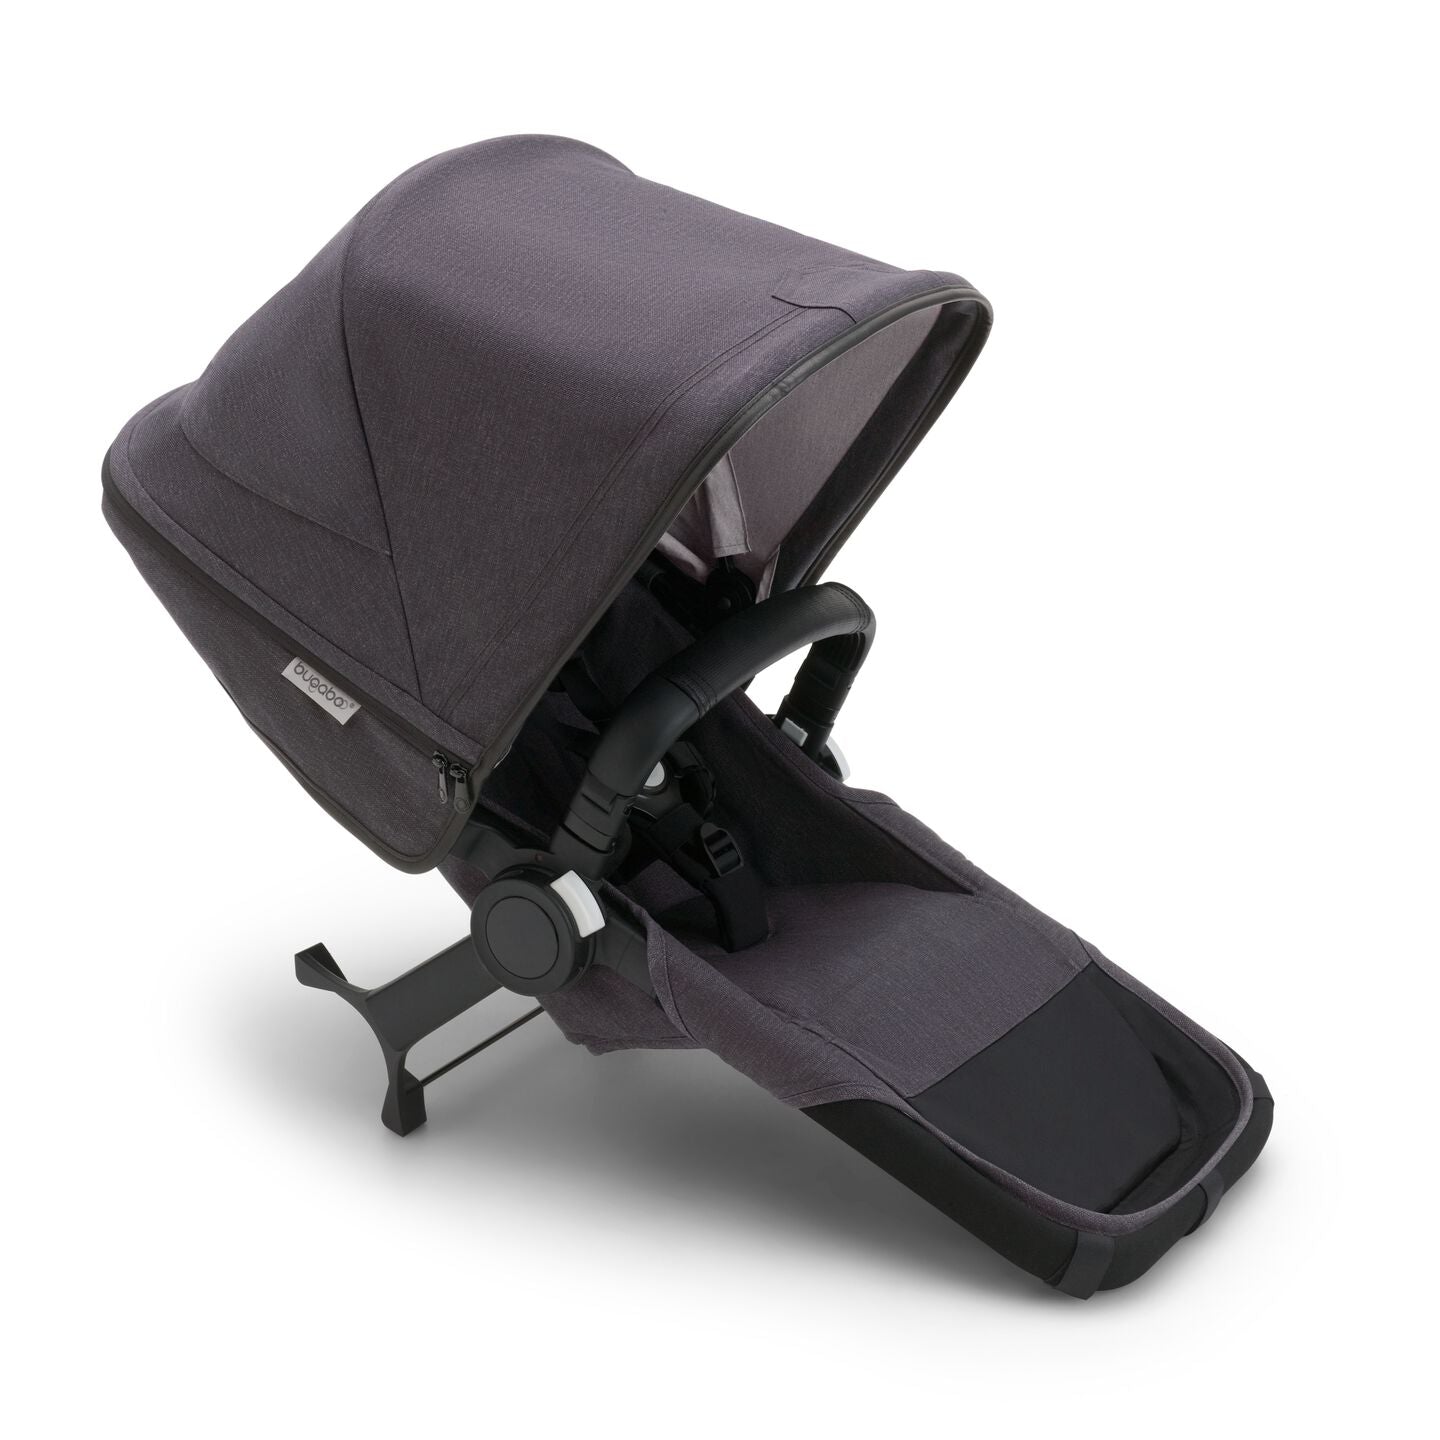 Bugaboo Donkey 5 Duo Extension Complete - ANB Baby -8717447605225$300 - $500